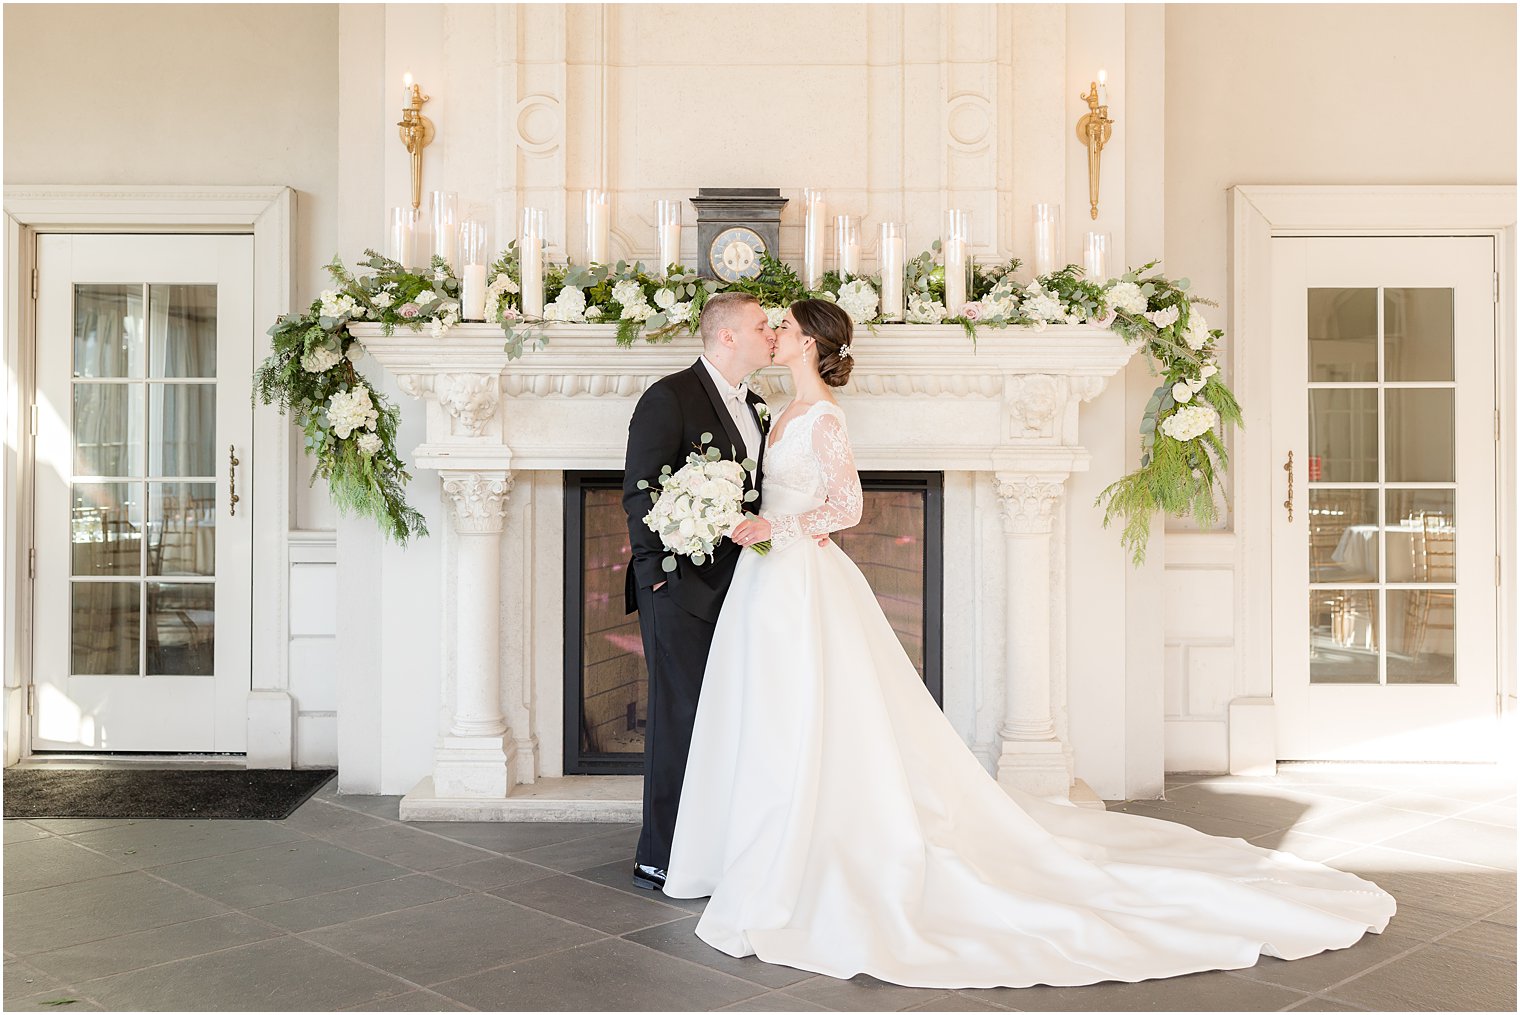 newlyweds kiss by fireplace with greenery draped across top